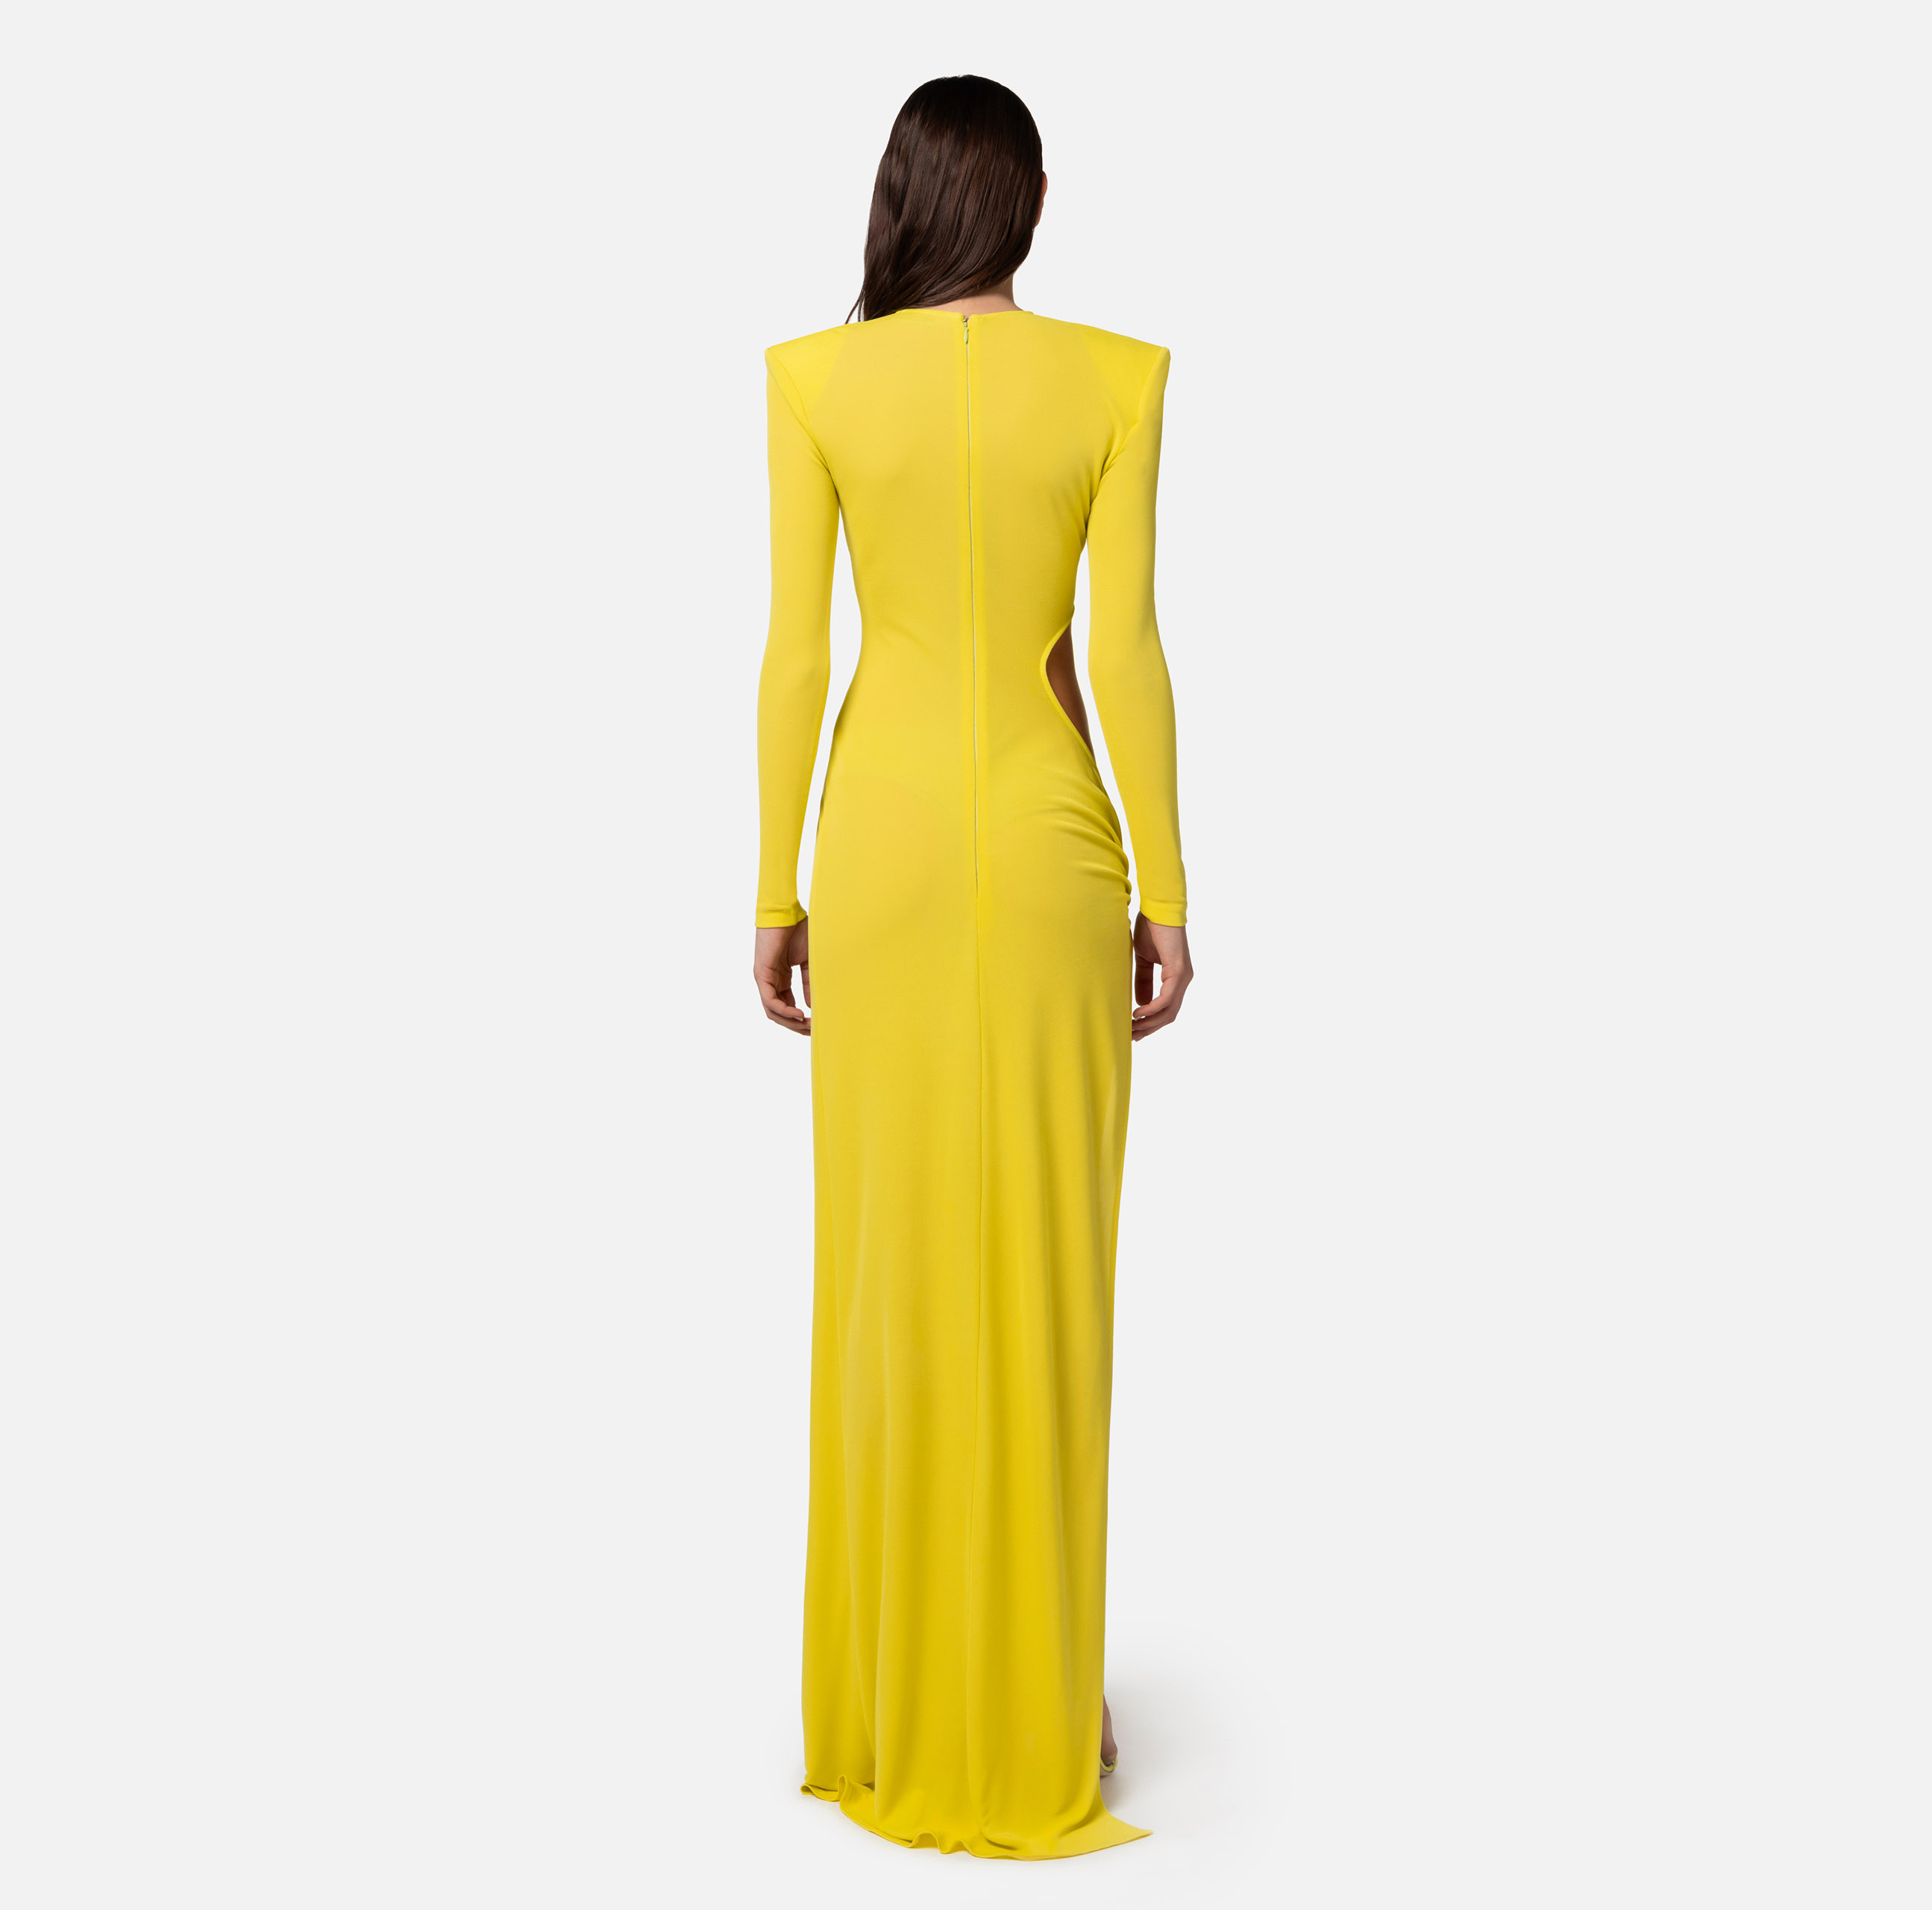 Red carpet dress in draped jersey with cut-out - Elisabetta Franchi